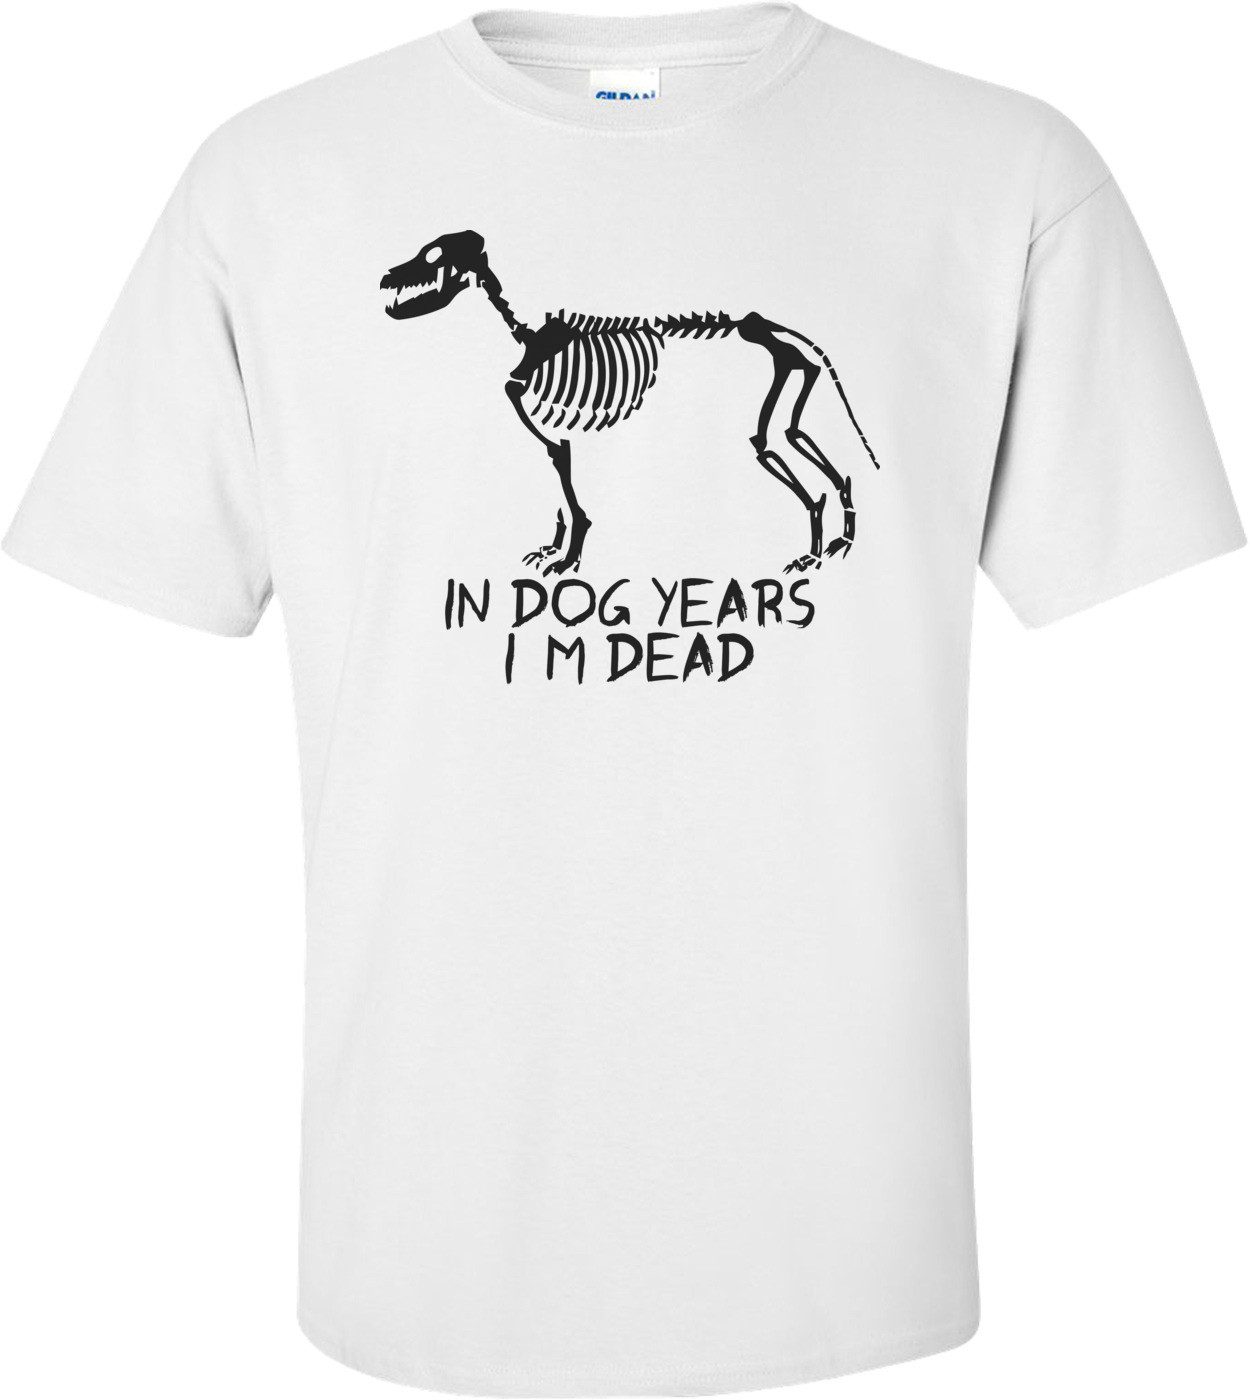 In Dog Years I'm Dead Funny Shirt